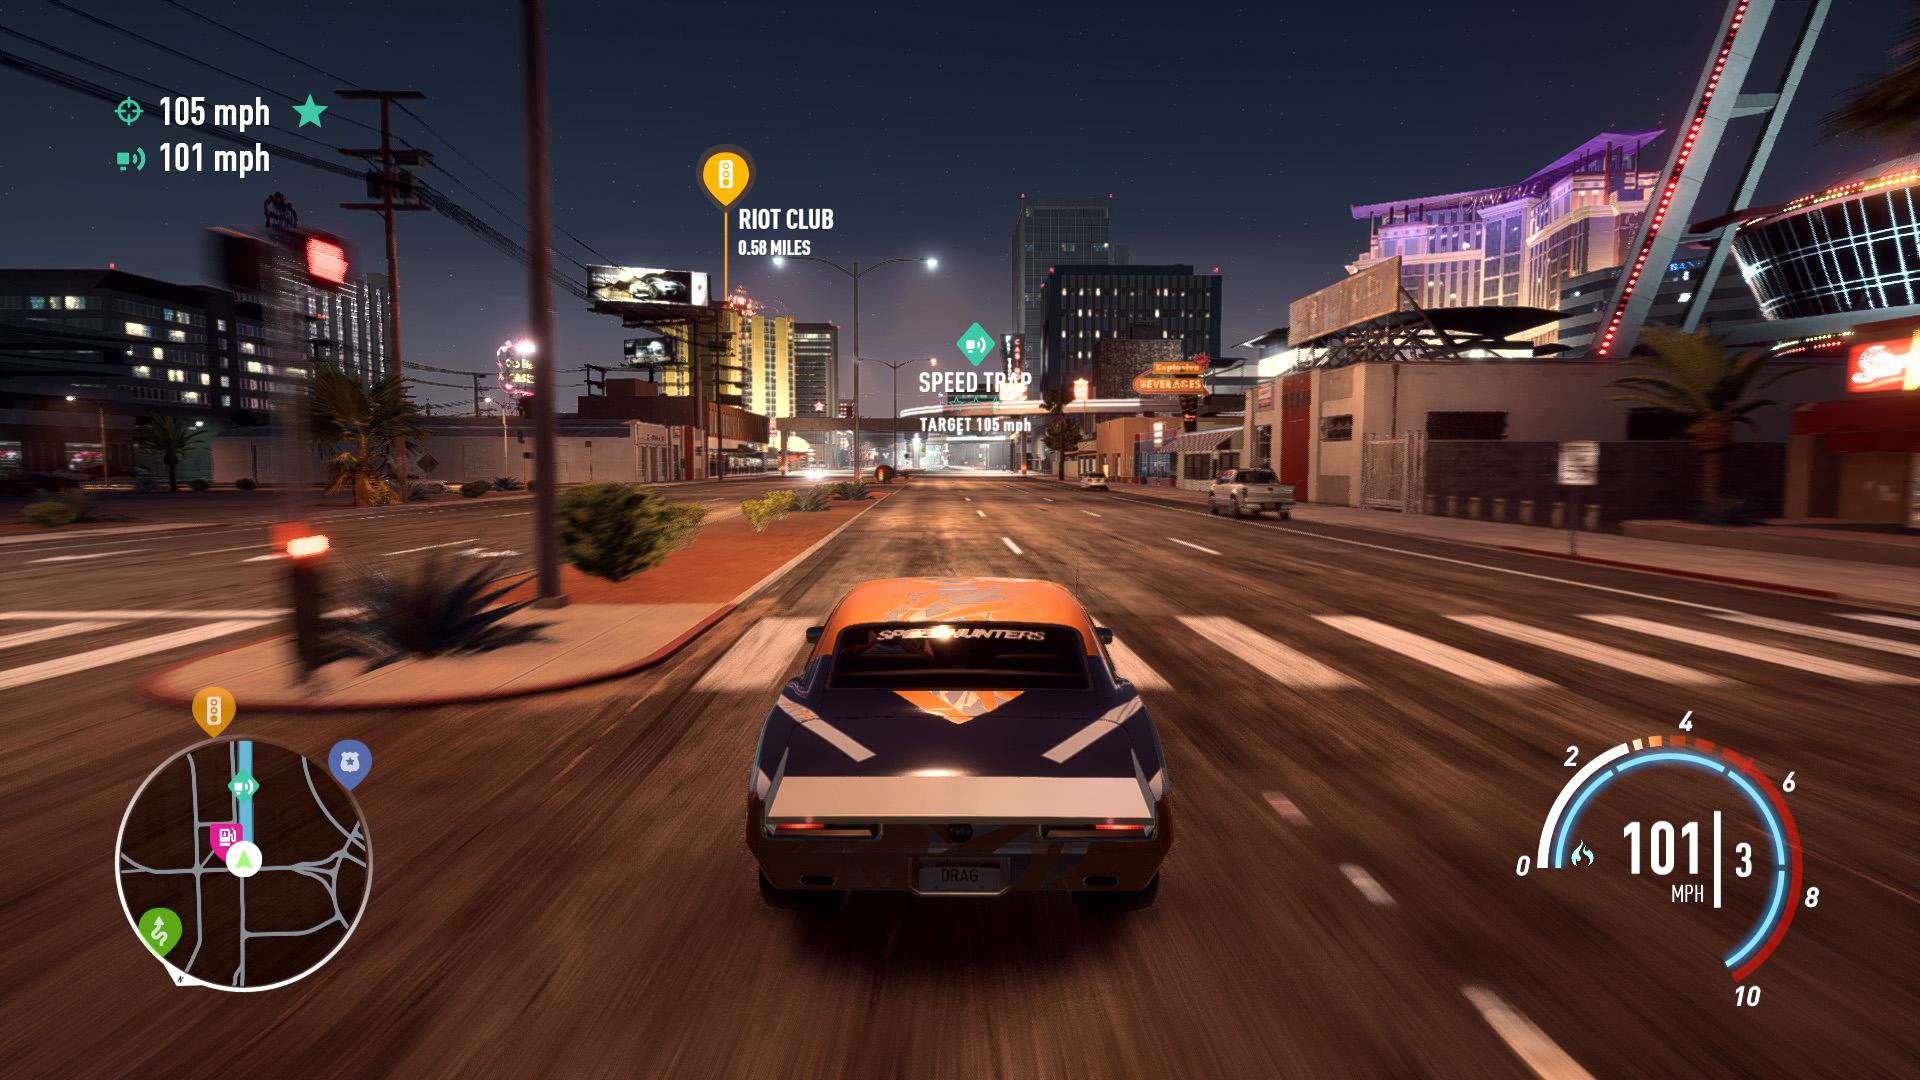 Need for Speed Payback Review: Needs More Tuning